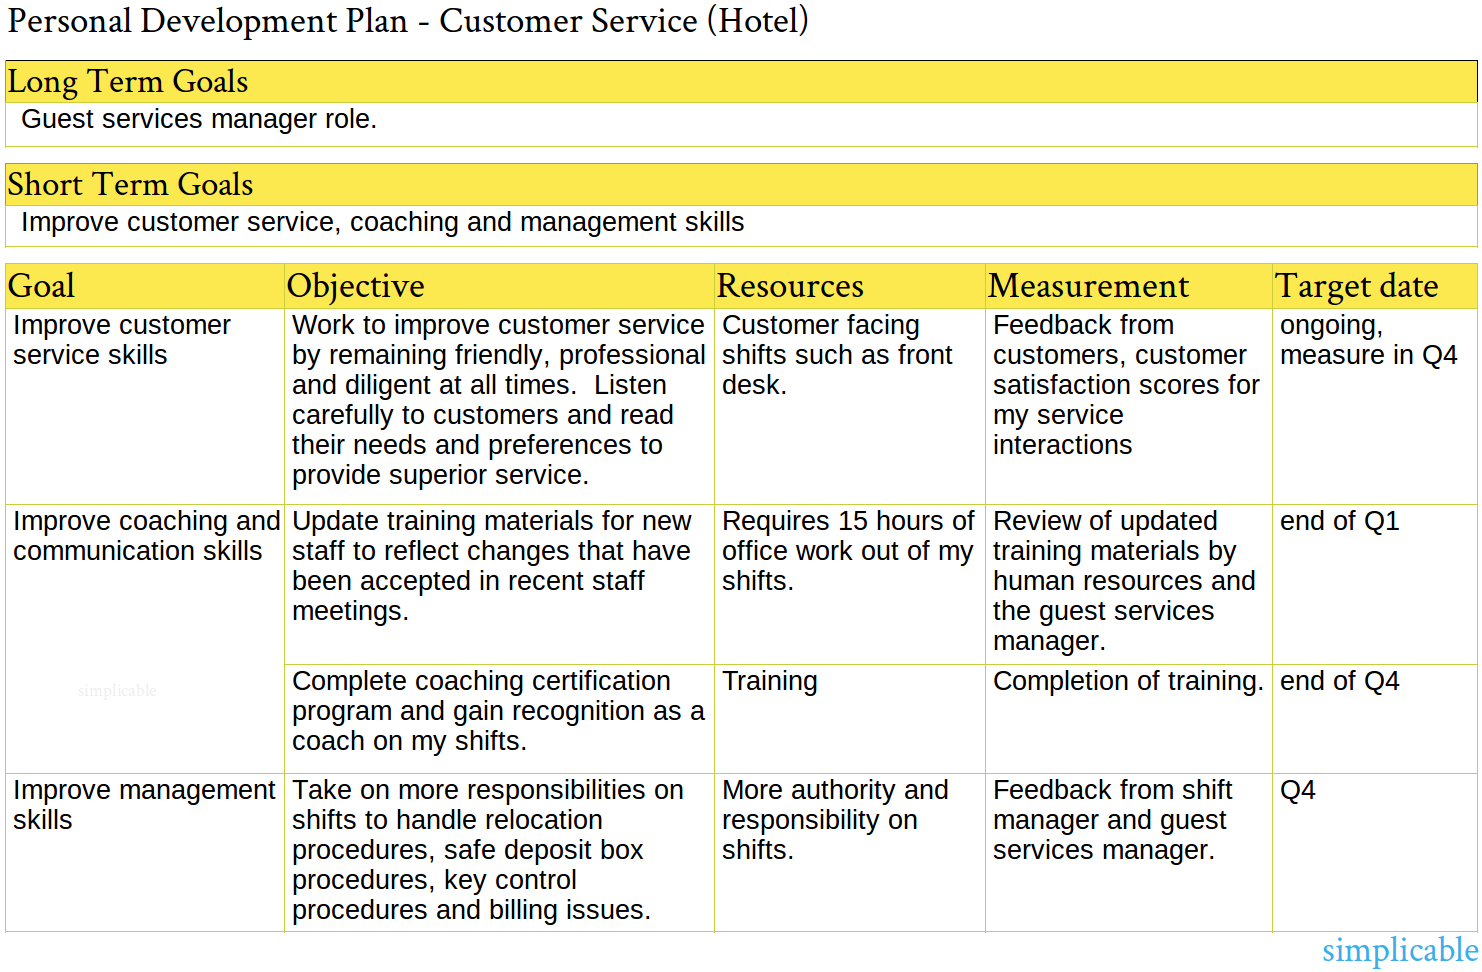 An illustrative example of a personal development plan for a customer service role at a hotel.   Shows how to position a plan to pitch for a promotion and ask for challenging work assignments.